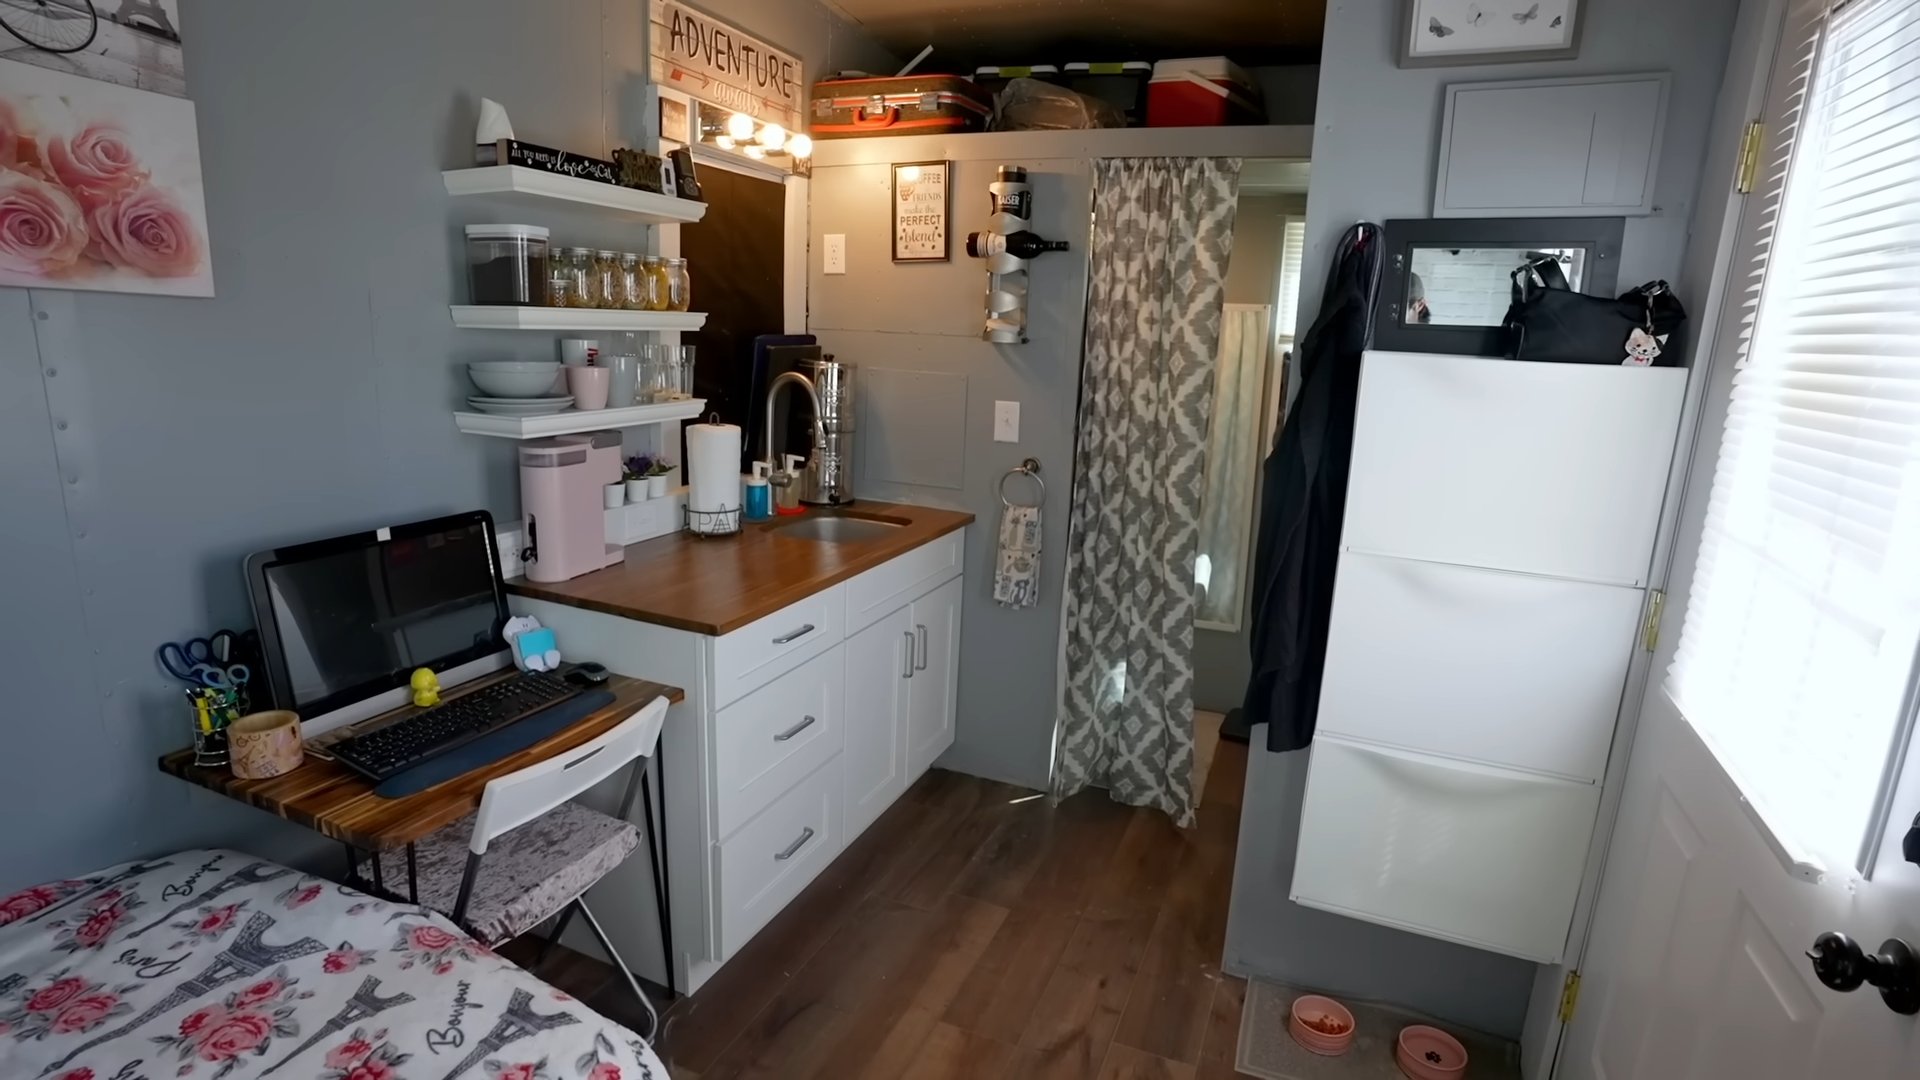 Overcoming Obstacles: Karen's Path to Tiny House Living